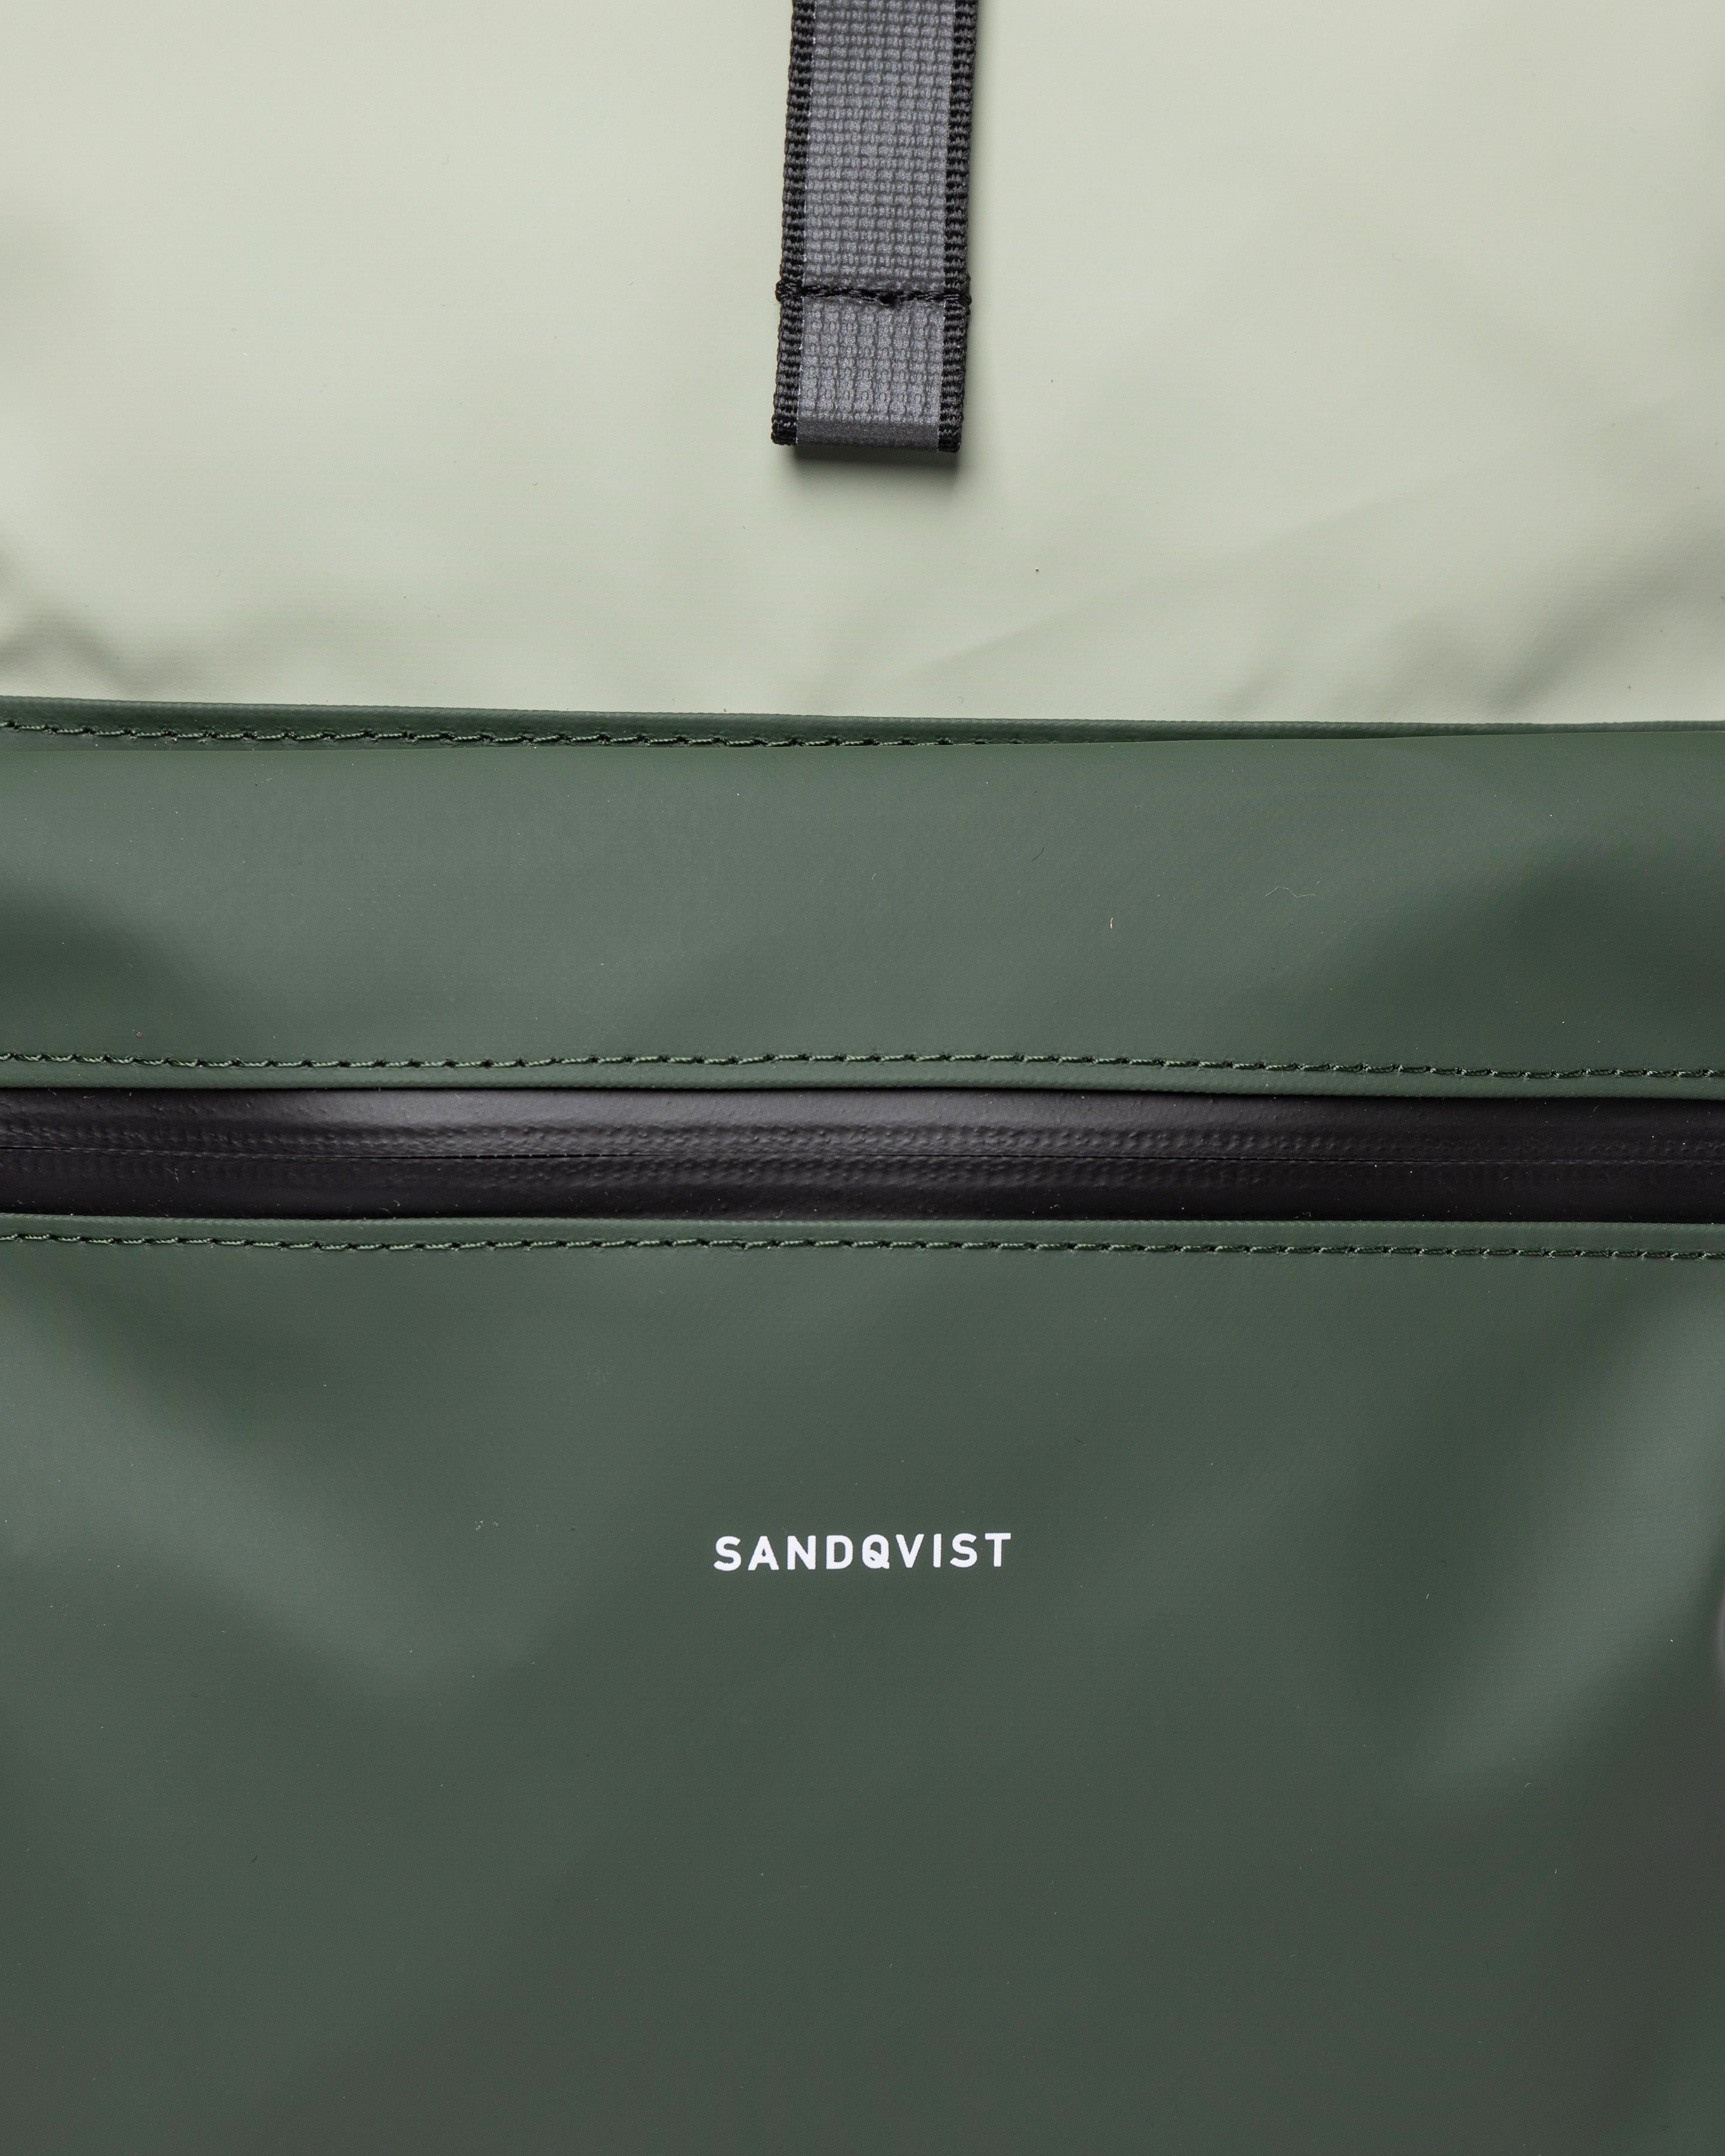 Sandqvist Ruben 2.0 Backpack in Green SQA2188 | Shop from eightywingold an official brand partner for Sandqvist Canada and US.